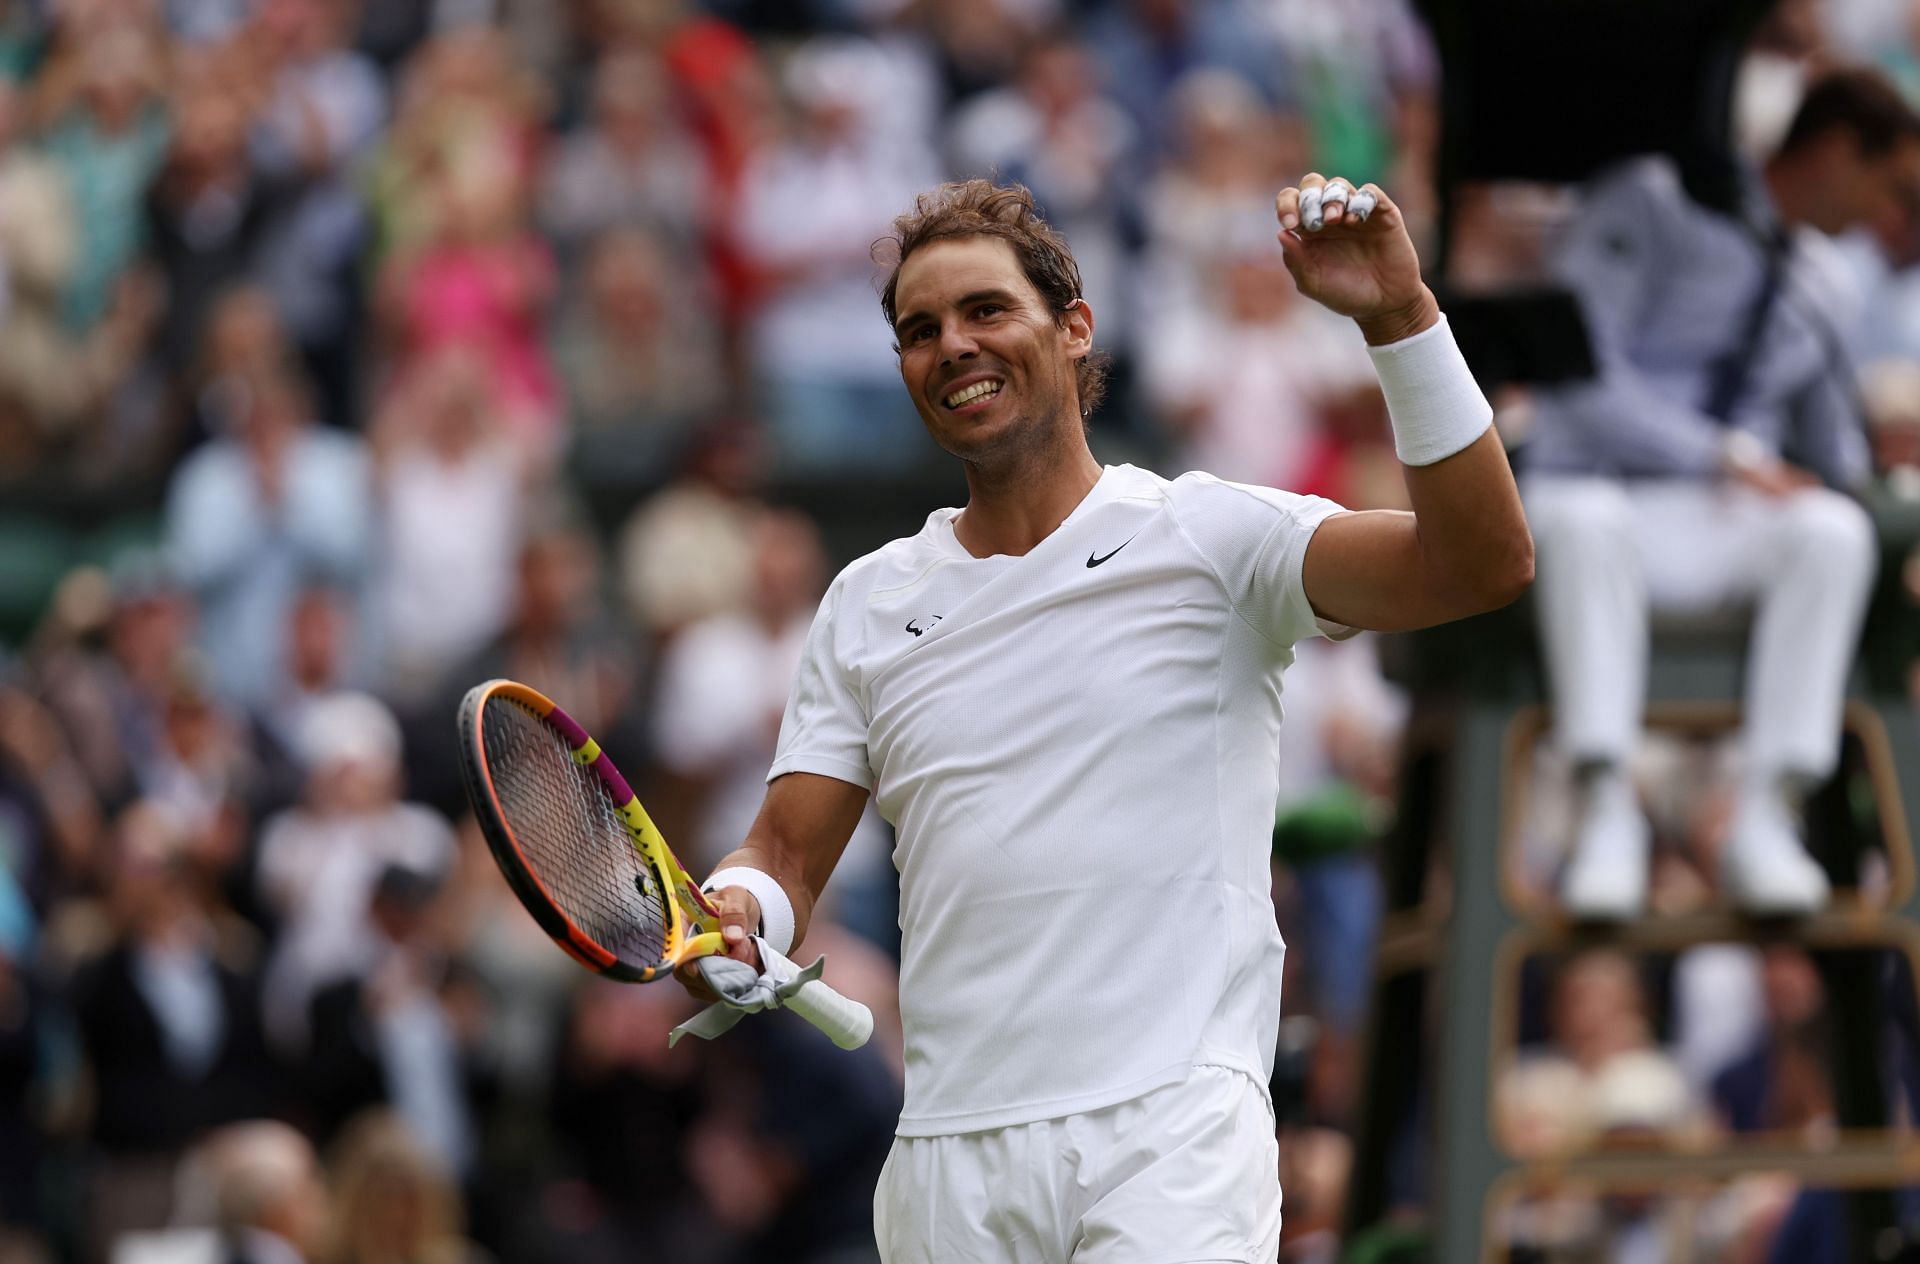 How Rafael Nadal S Wimbledon 2022 Draw Has Fallen Apart After The 1st Round